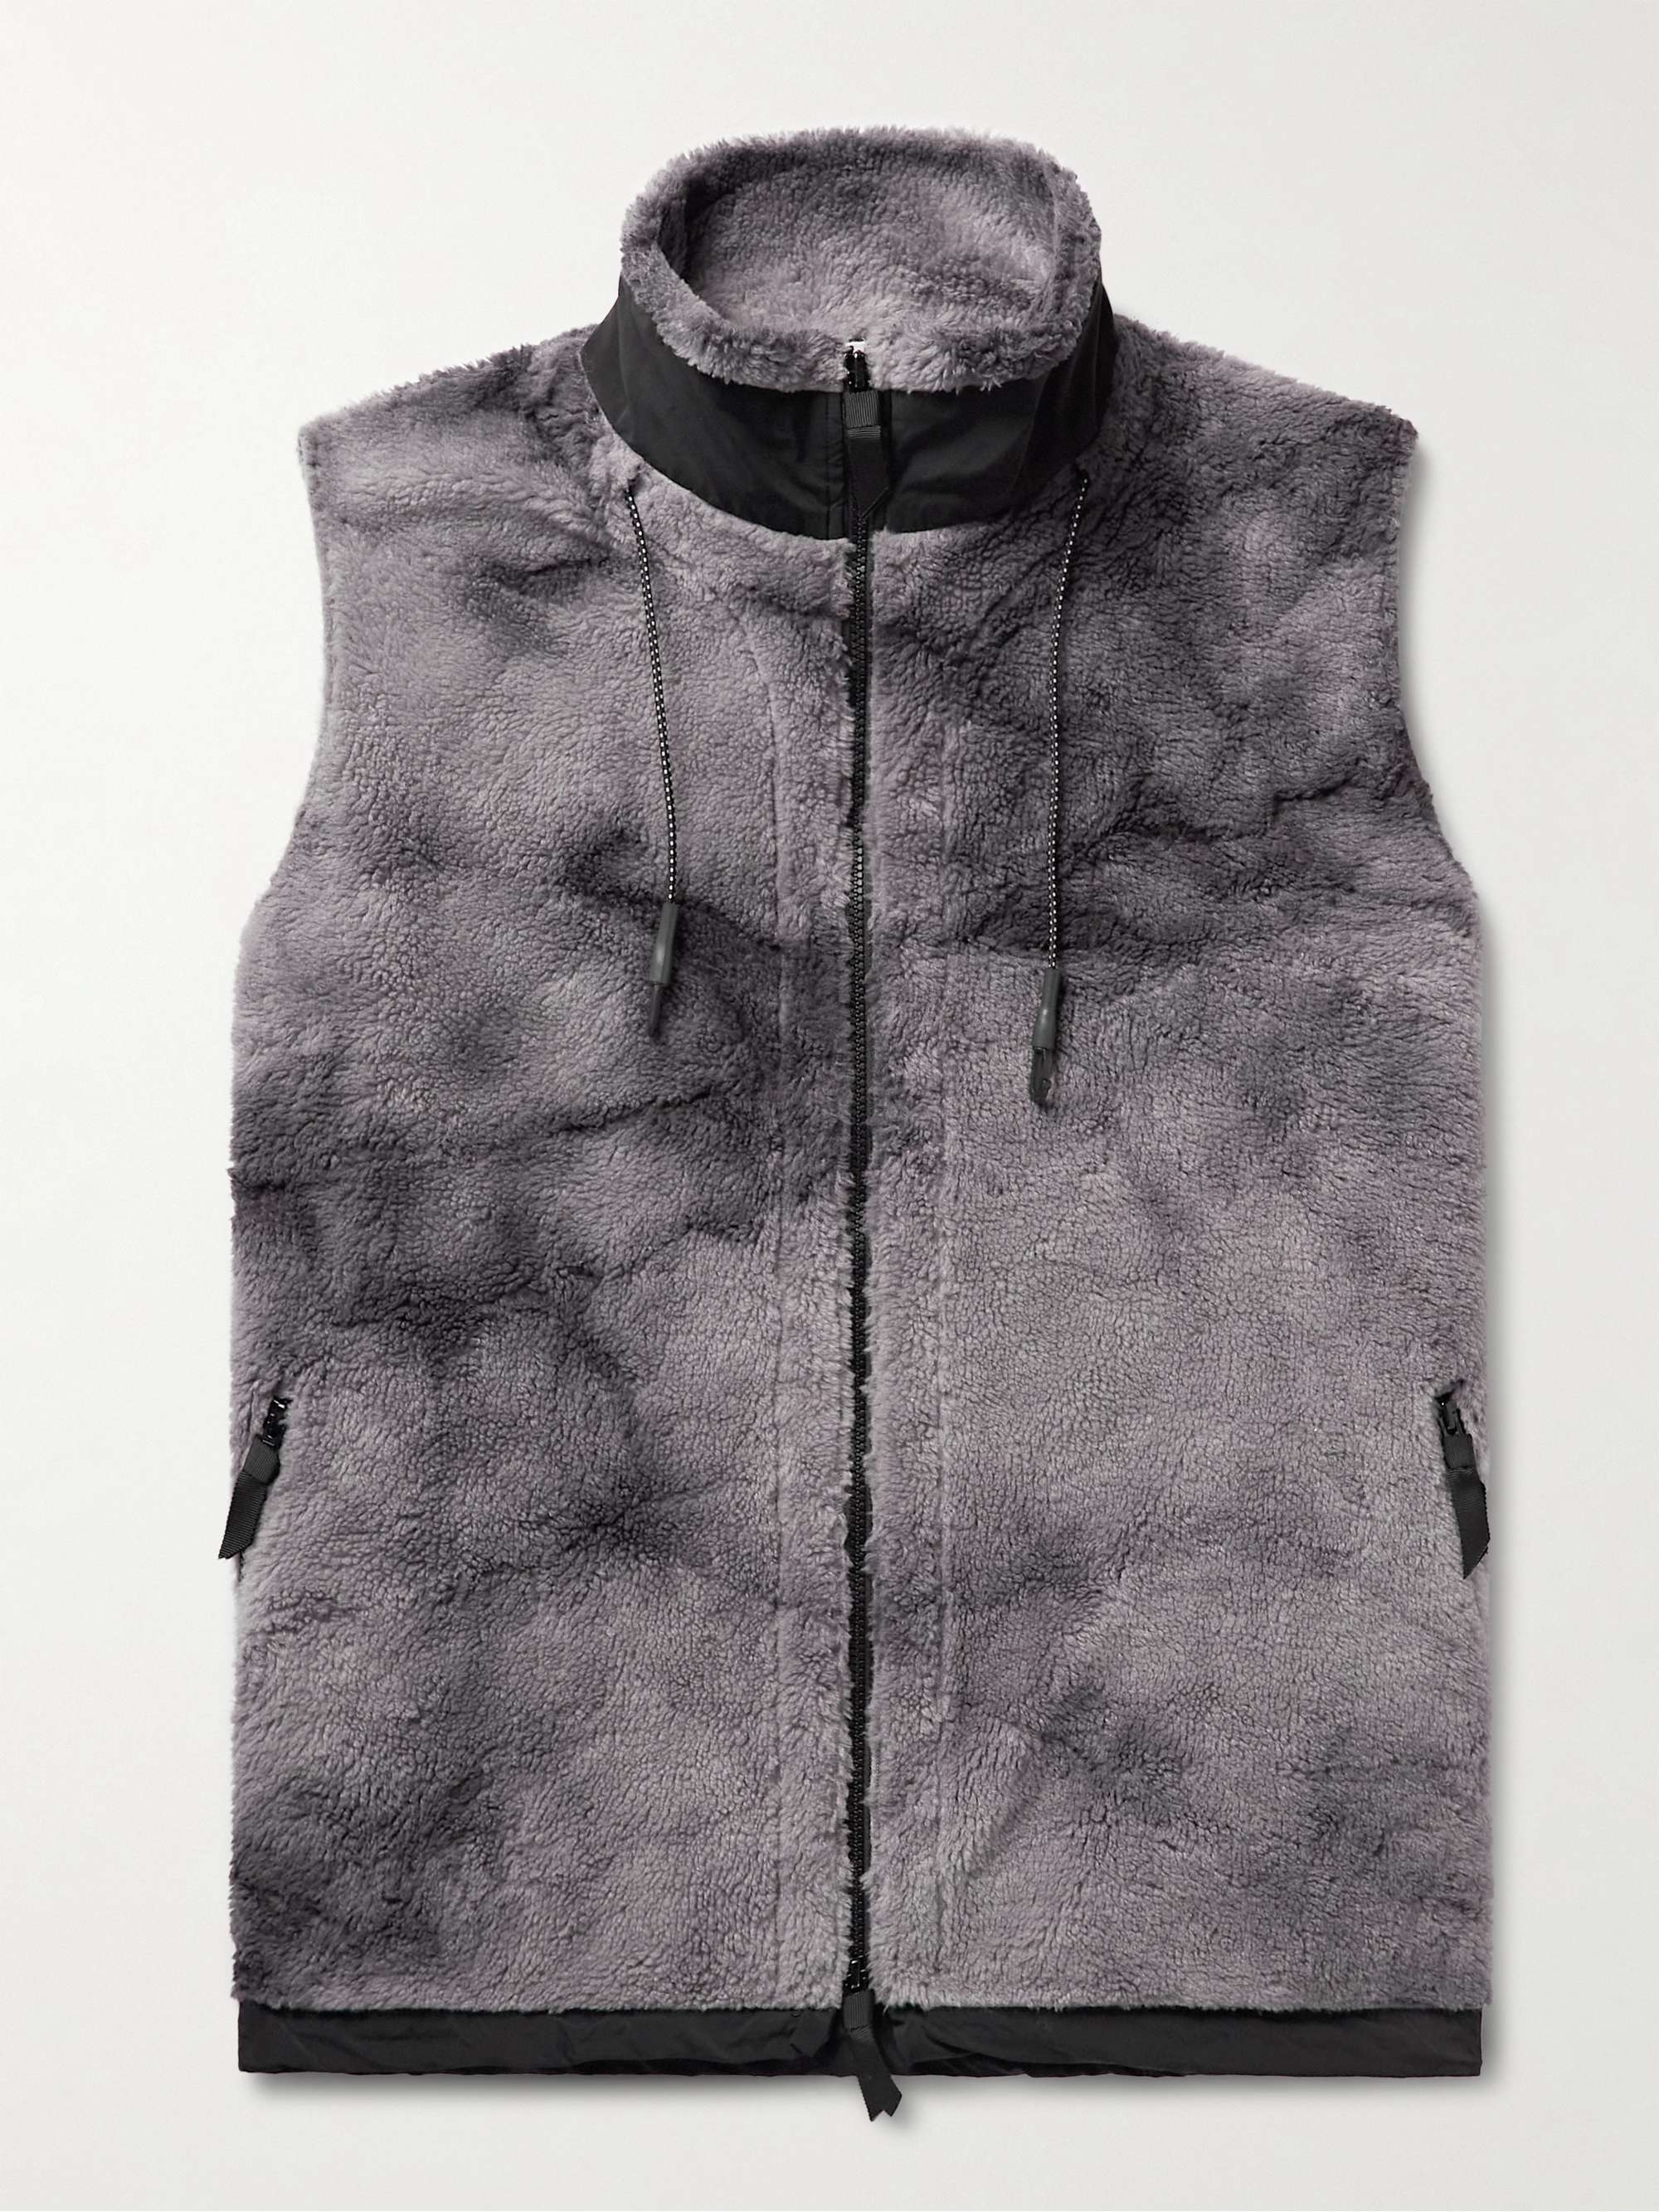 REMI RELIEF Shell-Trimmed Tie-Dyed Fleece Gilet